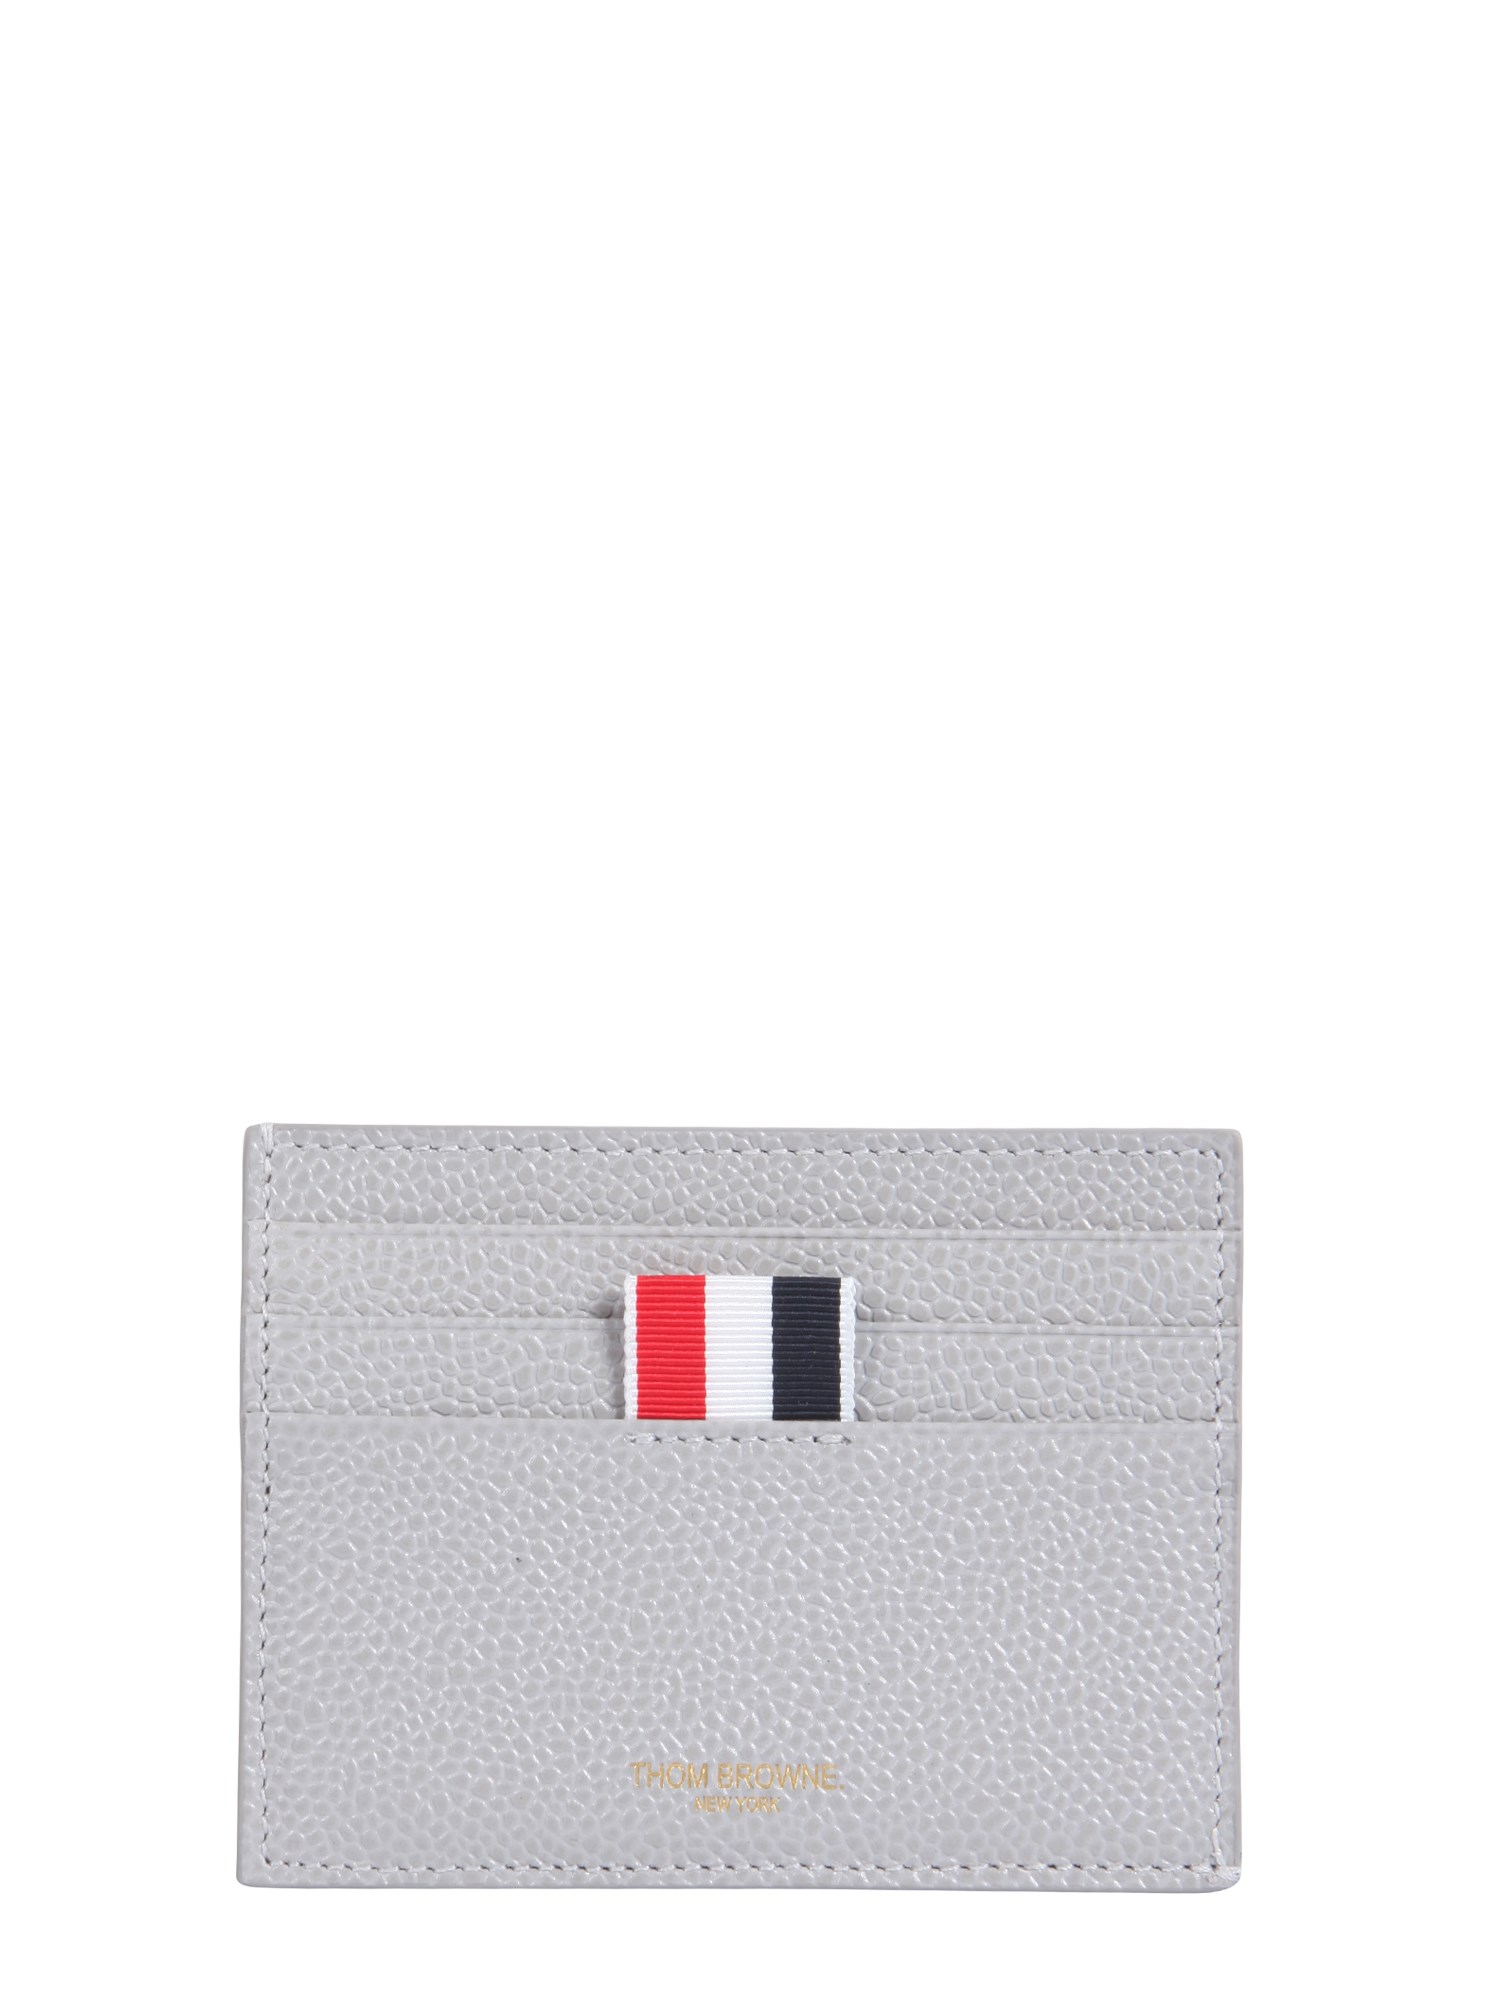 THOM BROWNE LEATHER CARD HOLDER,197508